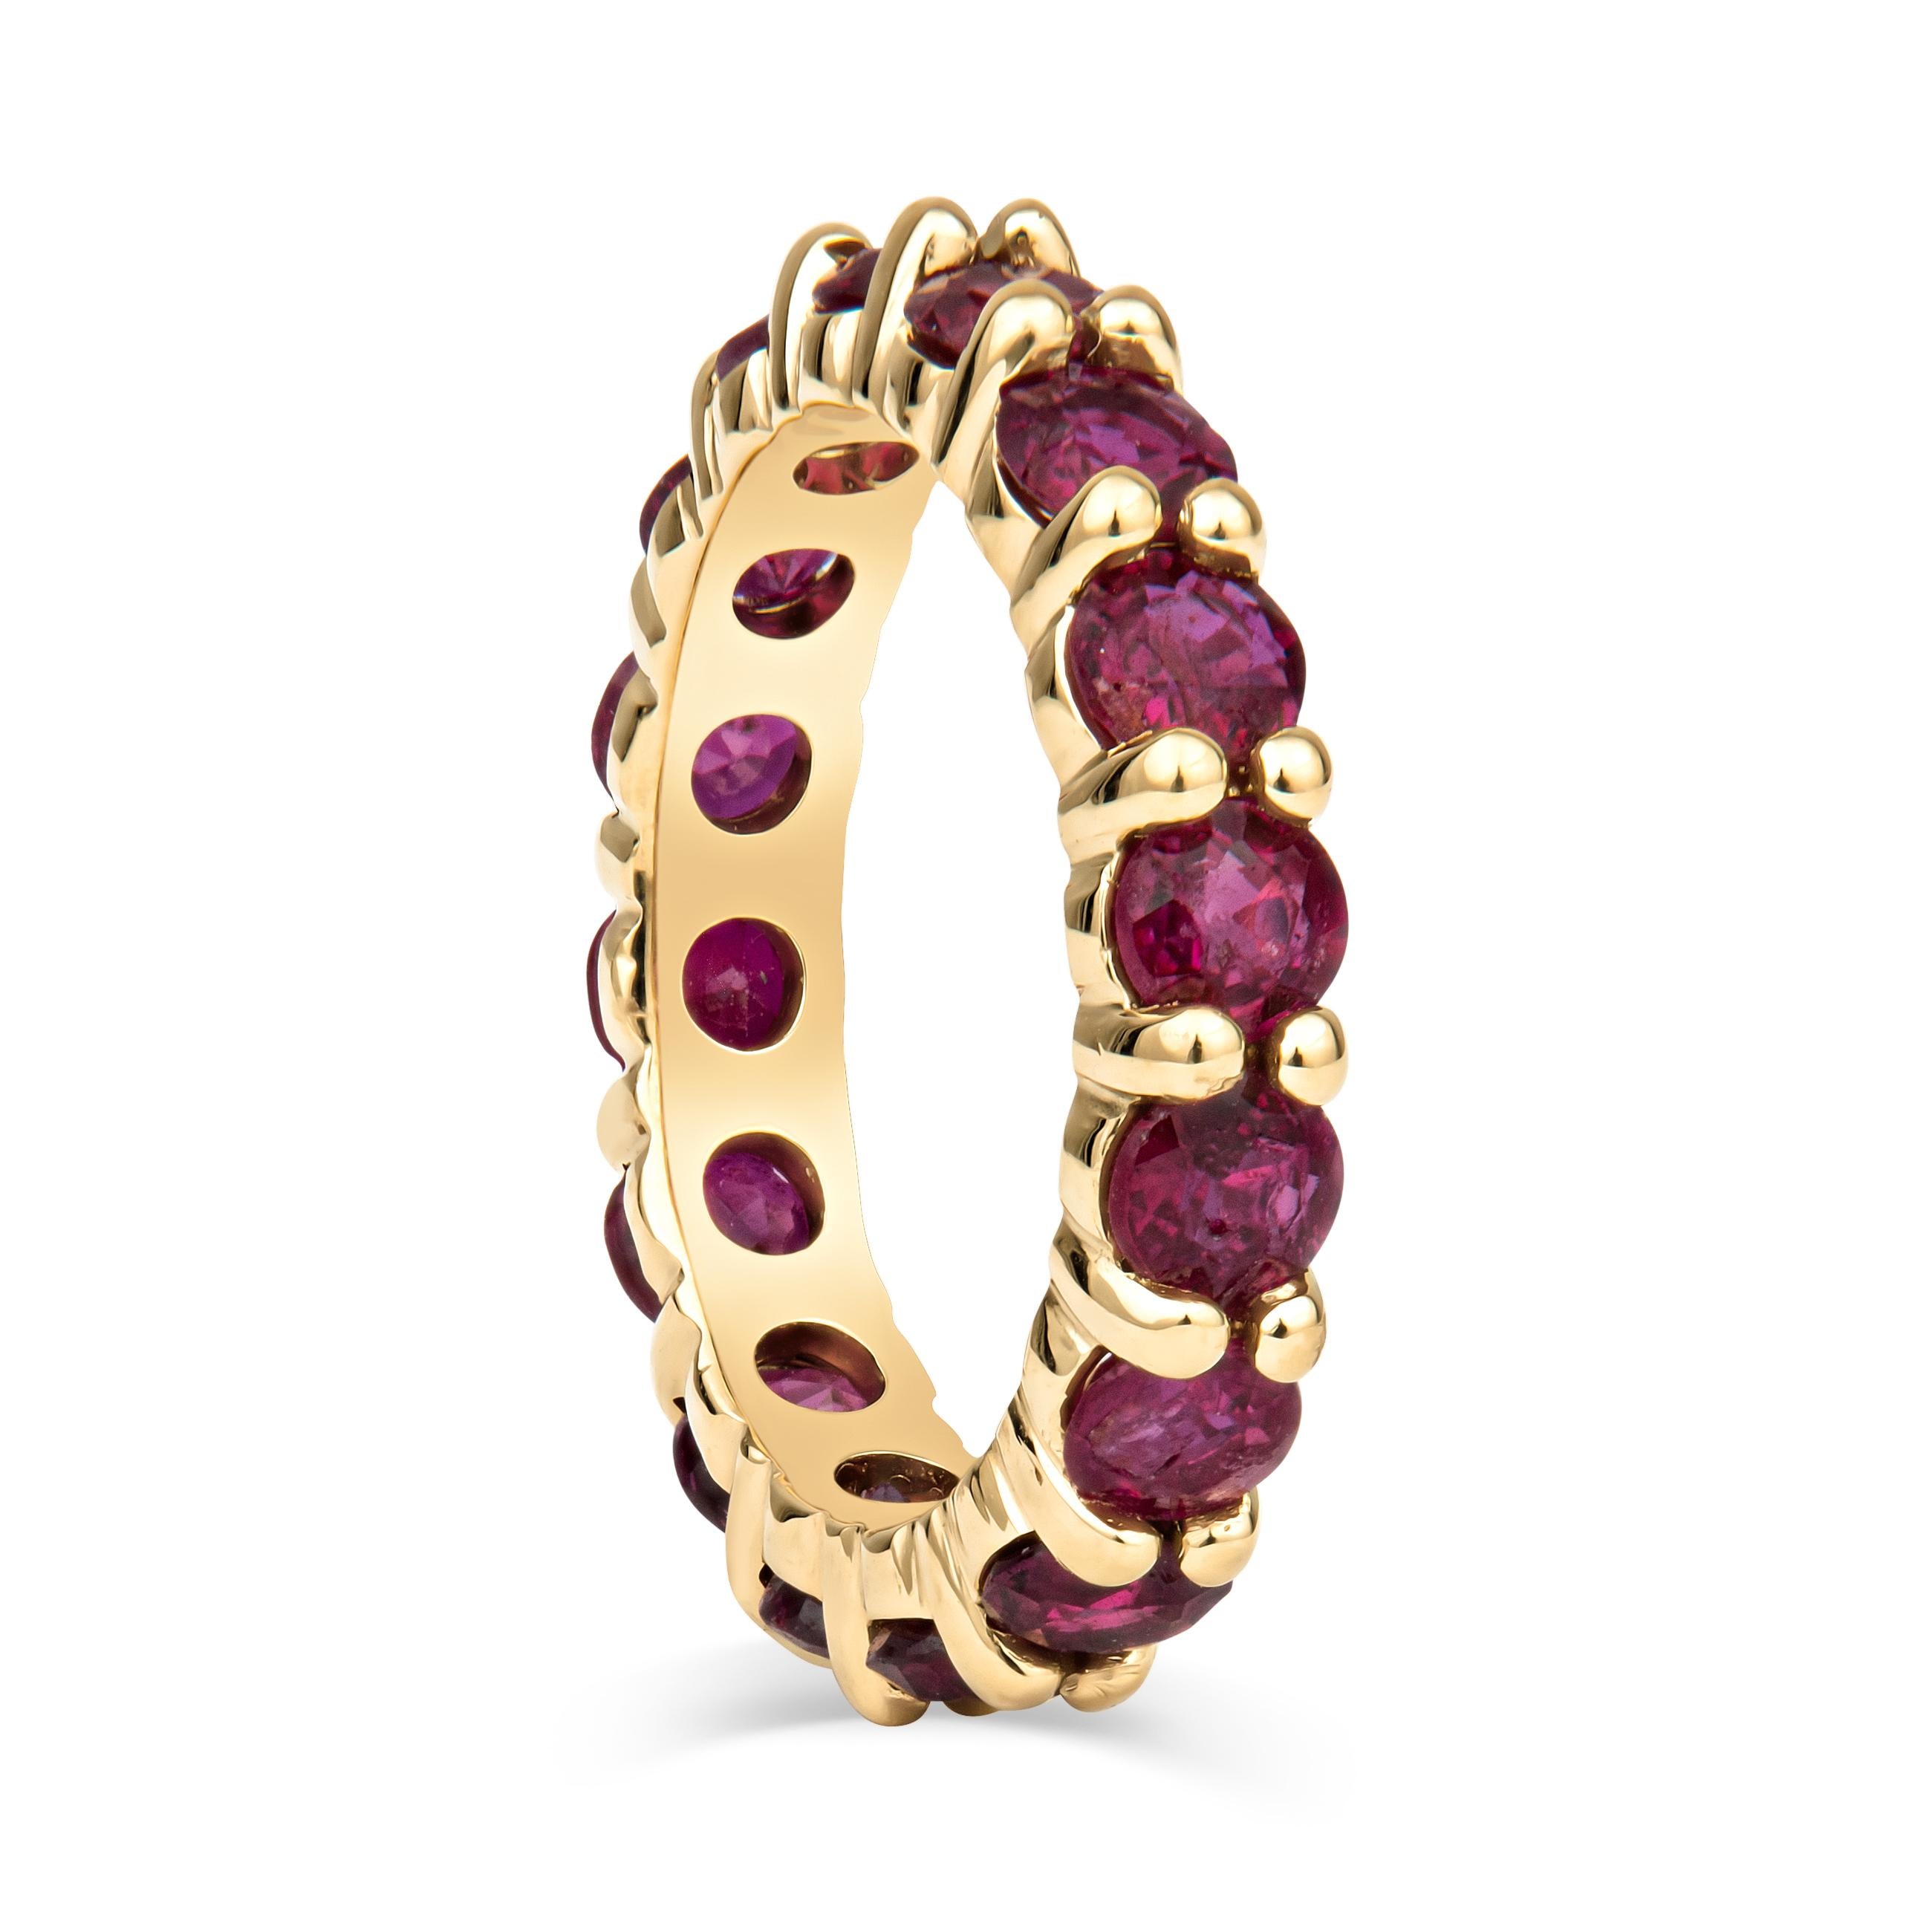 This incredible stacking band features 2.89ct total weight in beautiful, vivid red natural rubies, set in an 18kt yellow gold shared prong eternity band. The yellow of the ring complements the warm tones of the ruby, making the color stand out more.